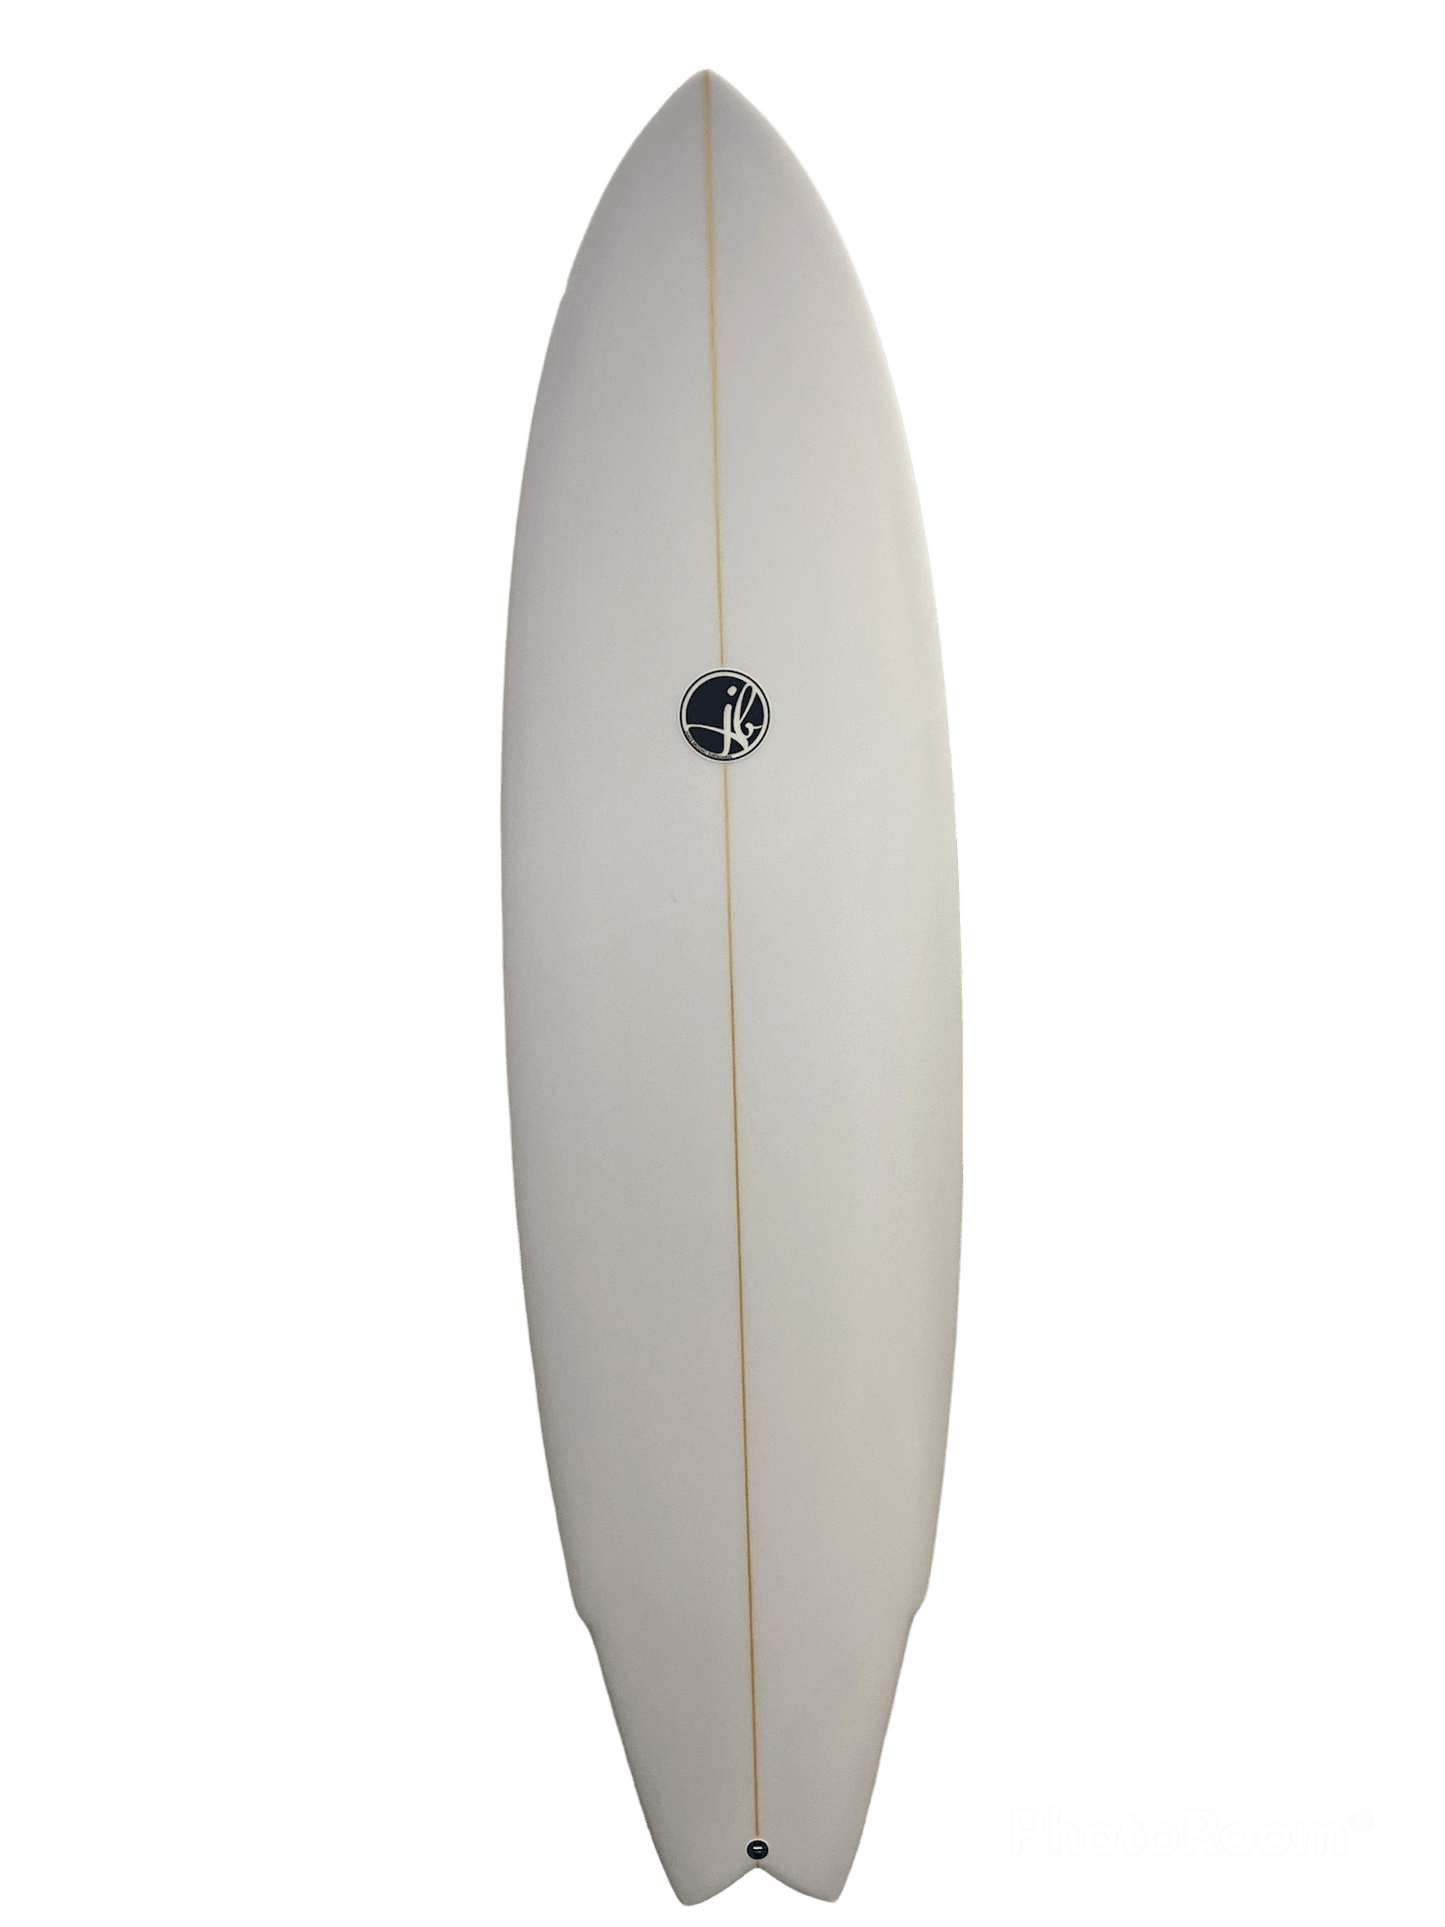 6'8 Muzzy Stingfish Wing Swallow Tail Surfboard Surfboards